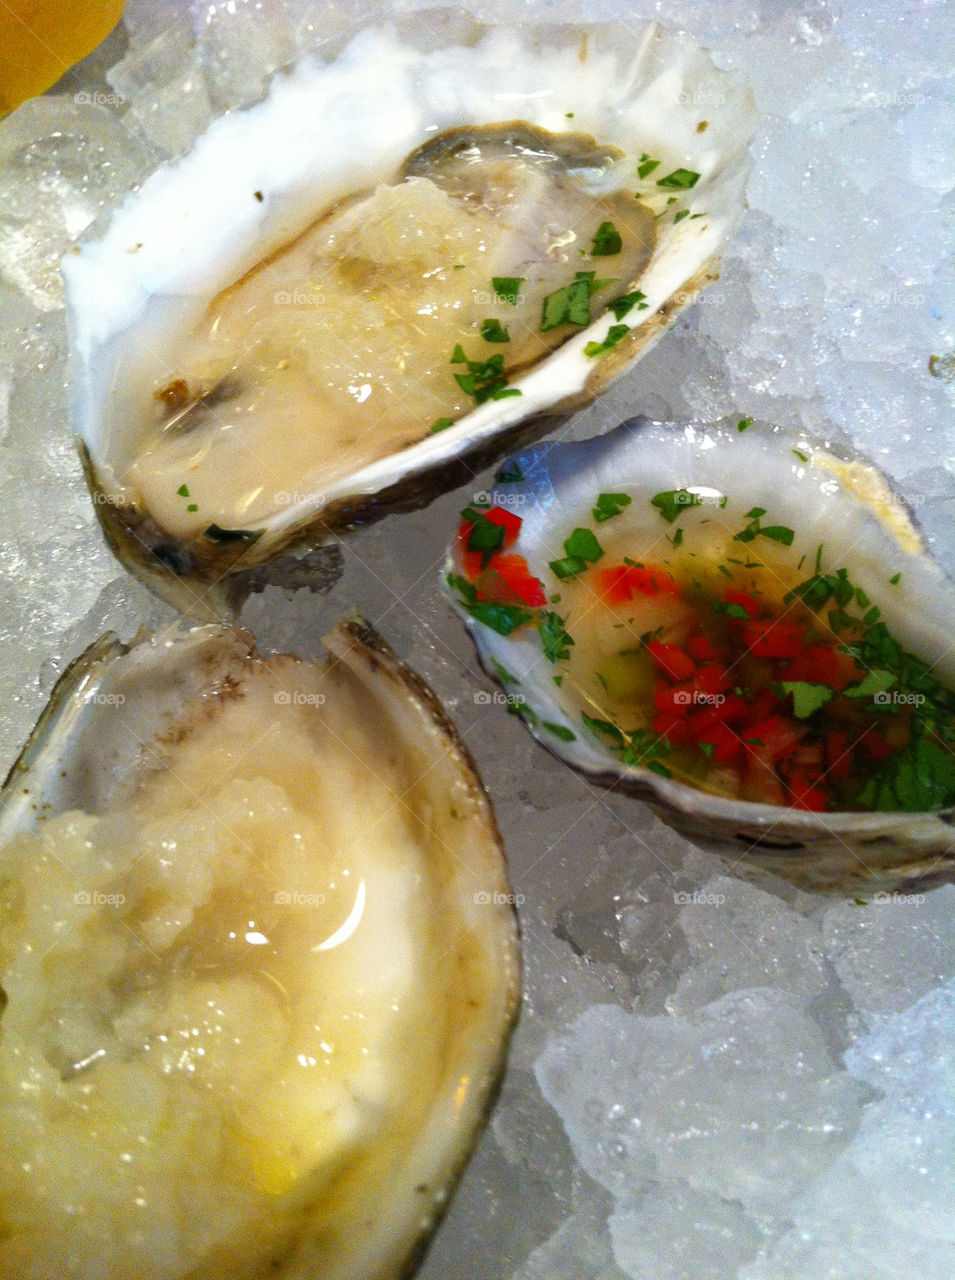 oysters eastcoast shooters by mhavertj